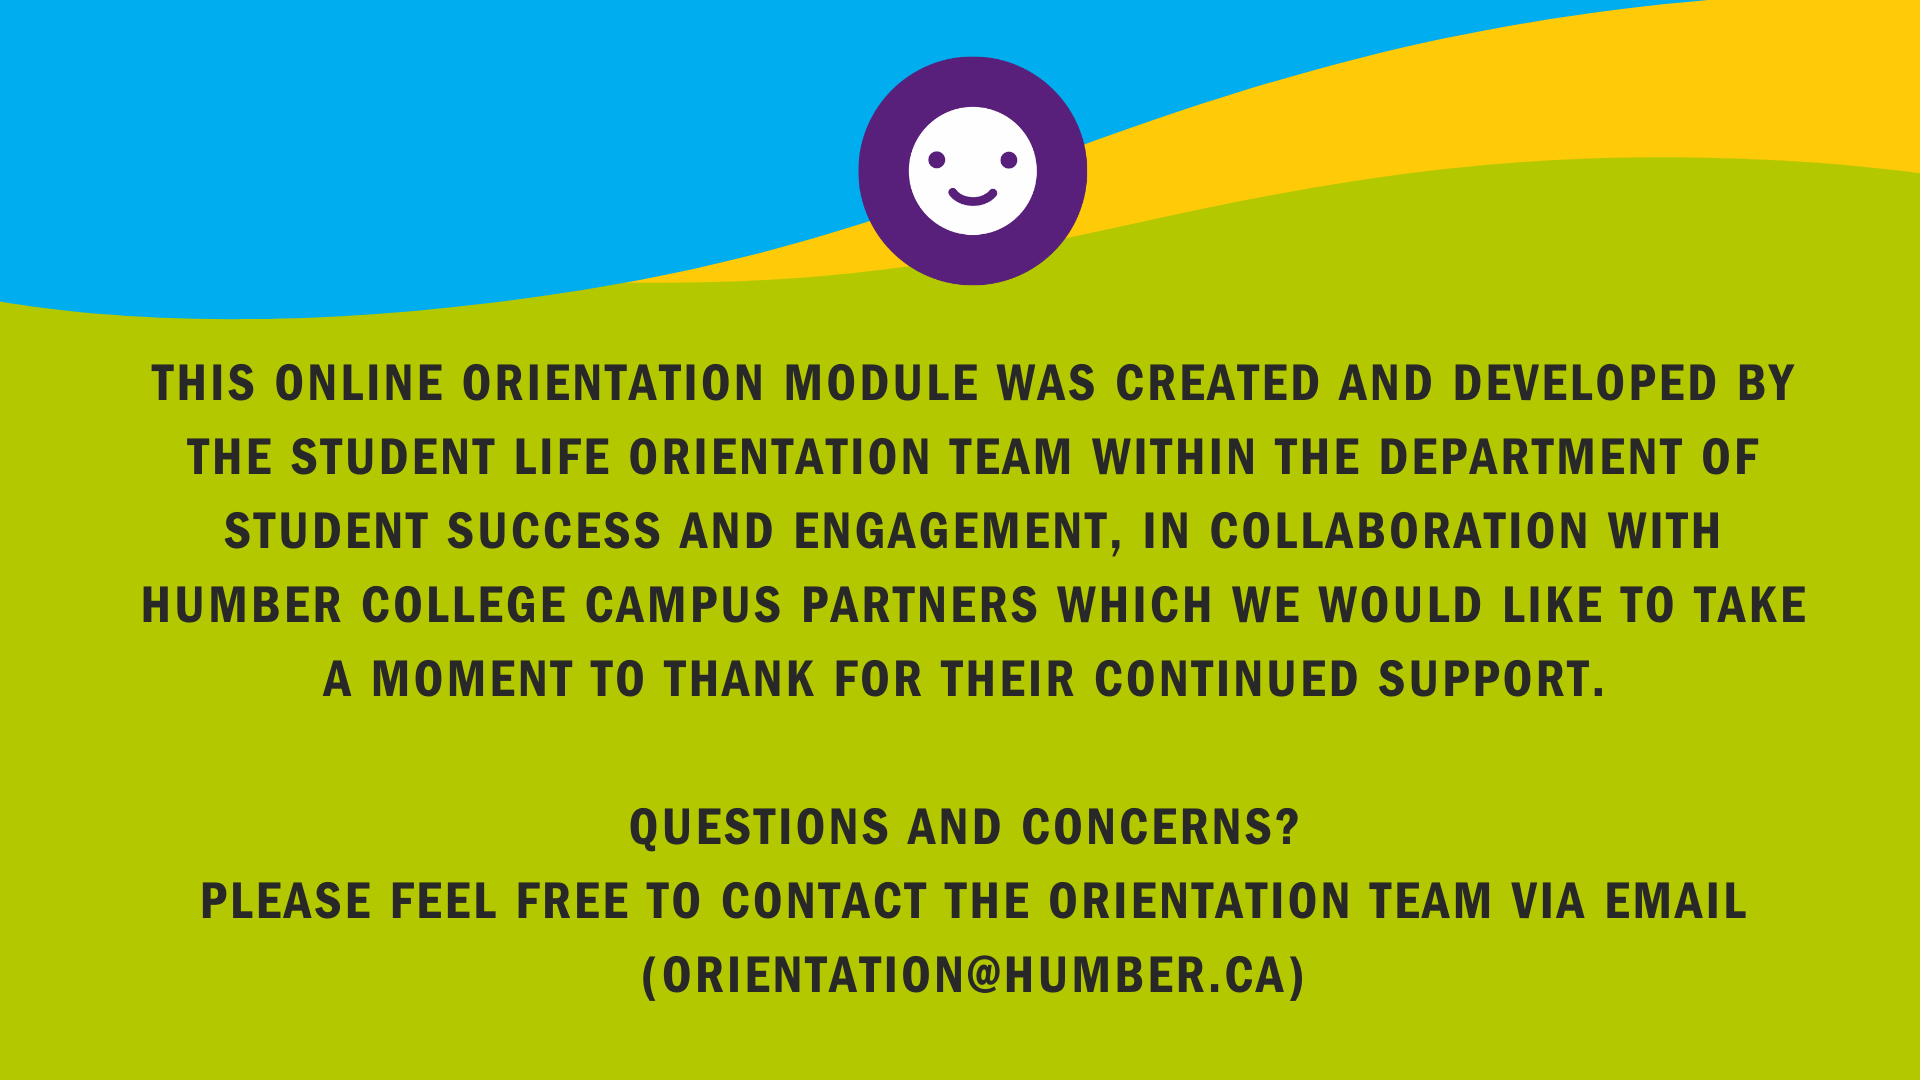 This Online Orientation Module was created and developed by the Student Life Orientation Team within the Department of Student Success and Engagement, in collaboration with Humber College Campus Partners which we would like to take a moment to thank for their continued support.  Questions and concerns? Please feel free to contact the Orientation Team via email (orientation@humber.ca)